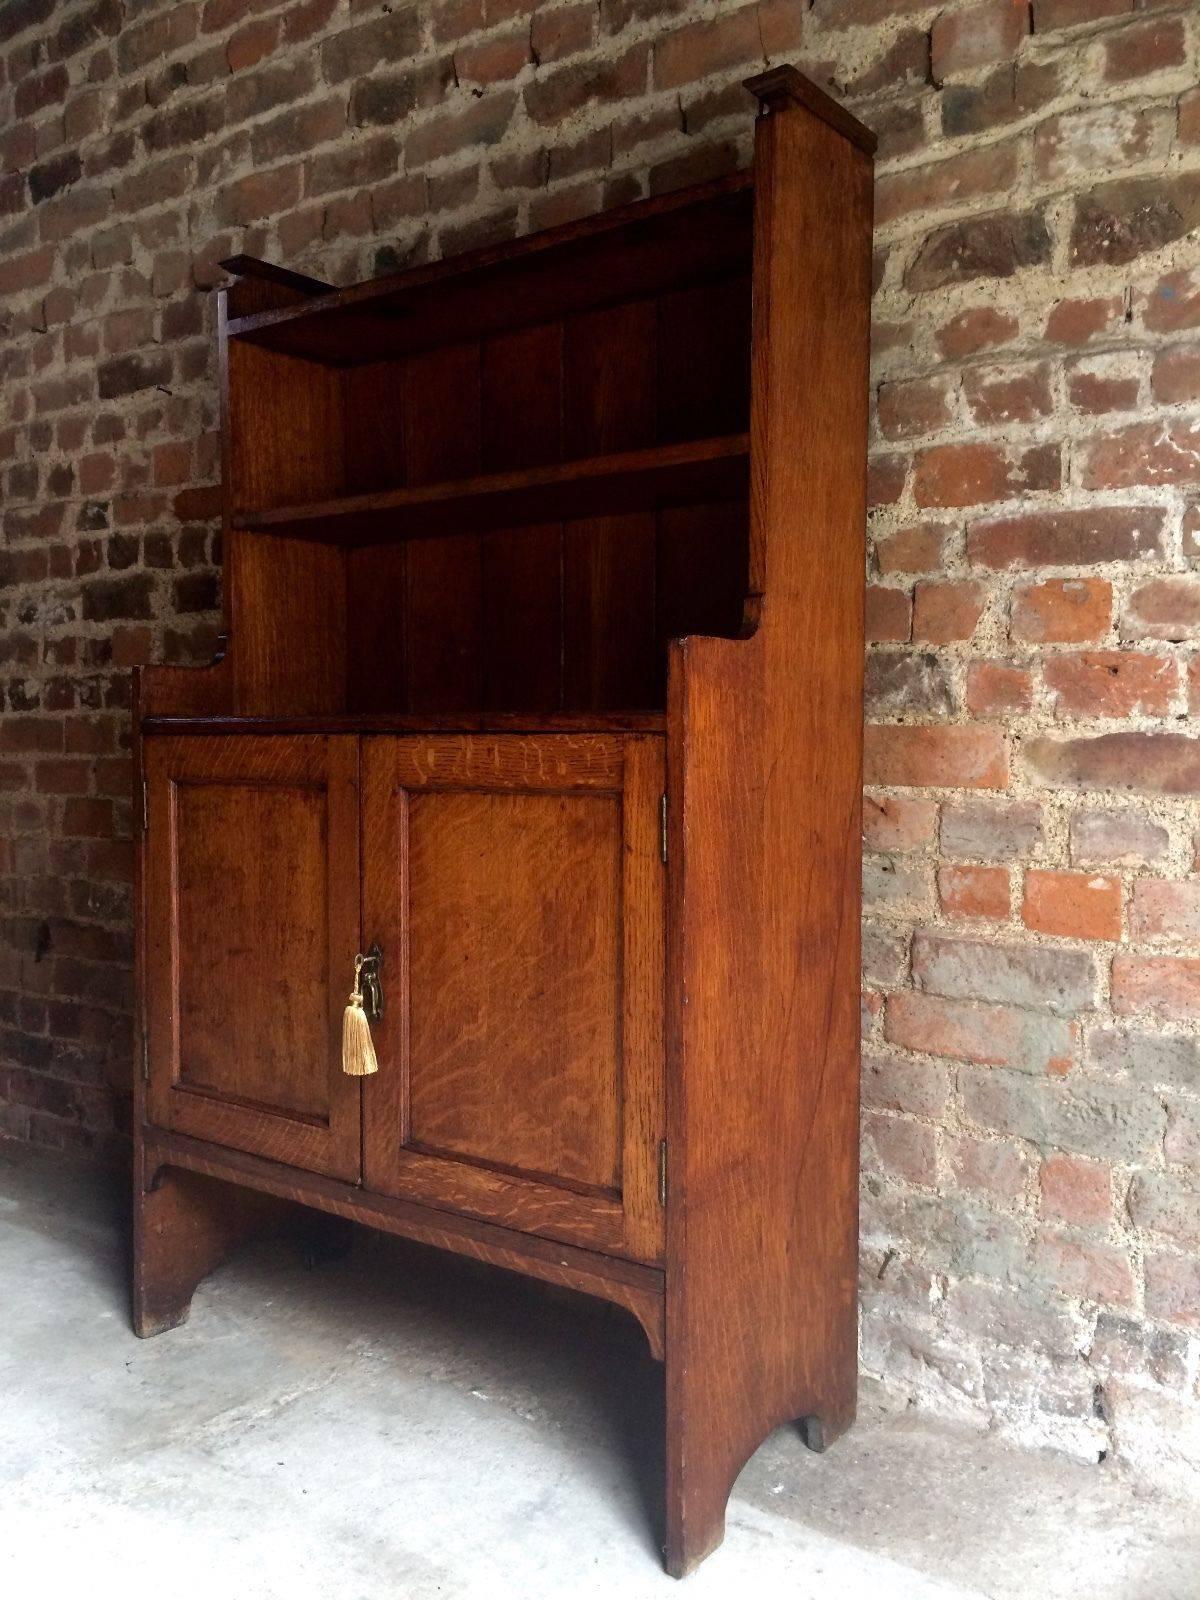 A stunningly beautiful original 'Arts & Crafts' American H Herrmann Ltd 1904 (with makers mark and stamp to back), Edwardian era golden oak dresser cabinet of upright form, constructed of golden solid oak having twin-door cupboard with shelves